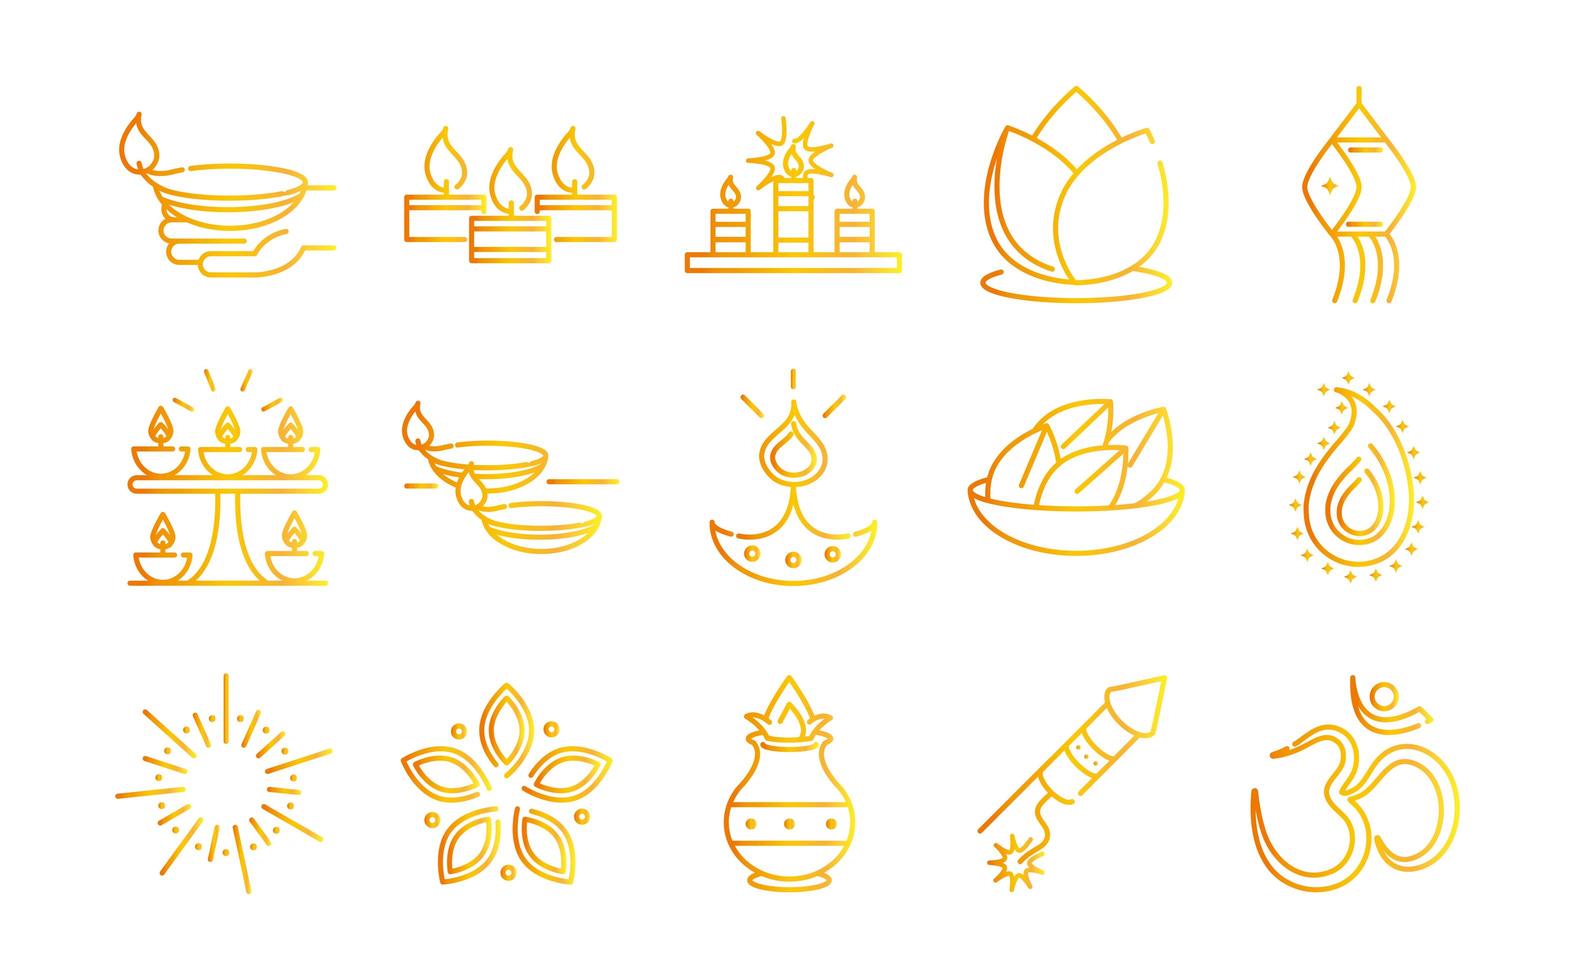 happy diwali india festival deepavali religion event gradient style icons collection vector